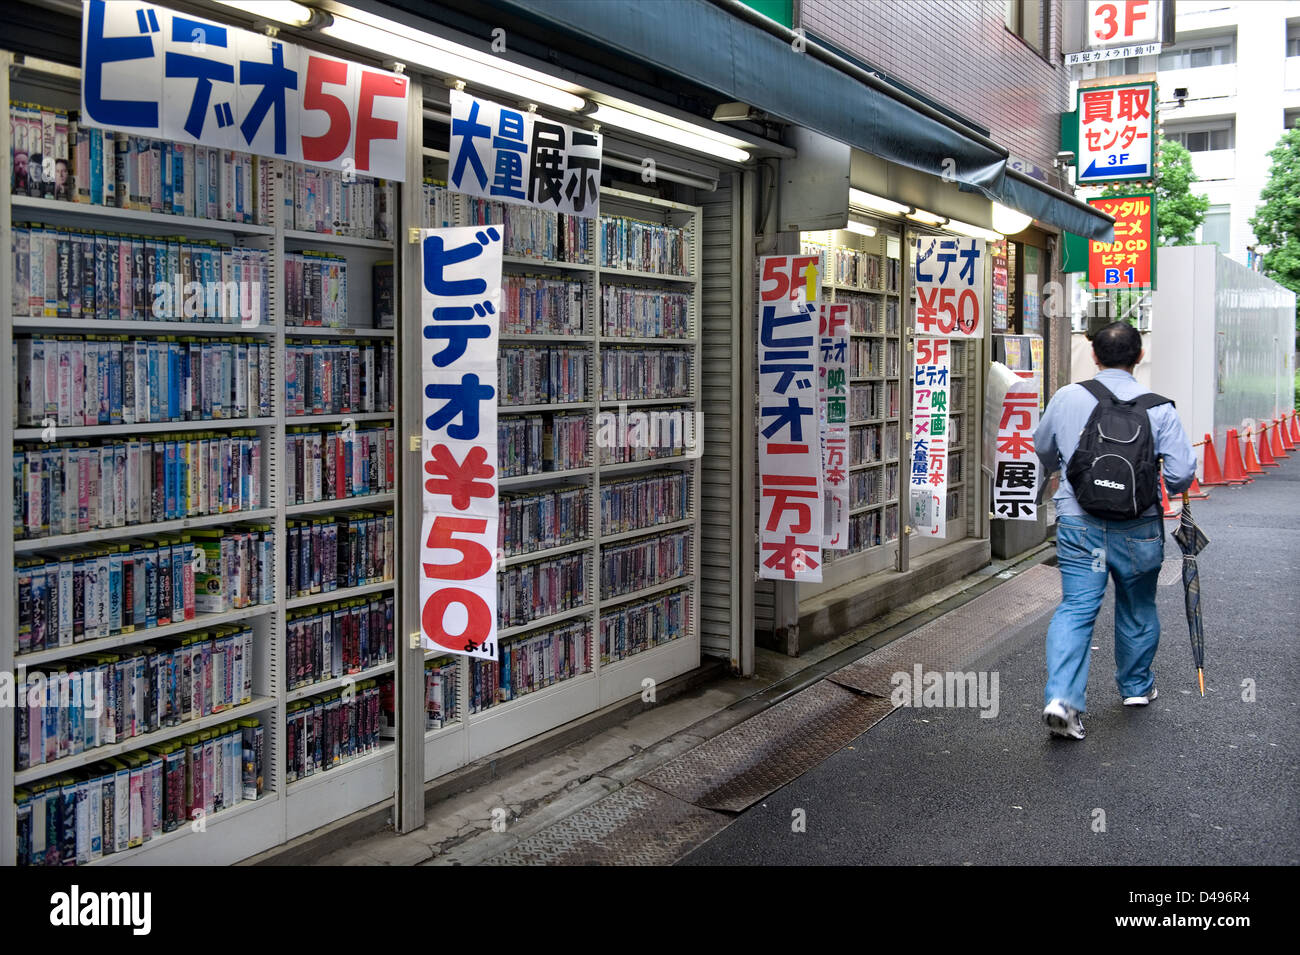 Used video tapes for sale street side in the consumer electronics district of Akihabara, Tokyo, Japan Stock Photo